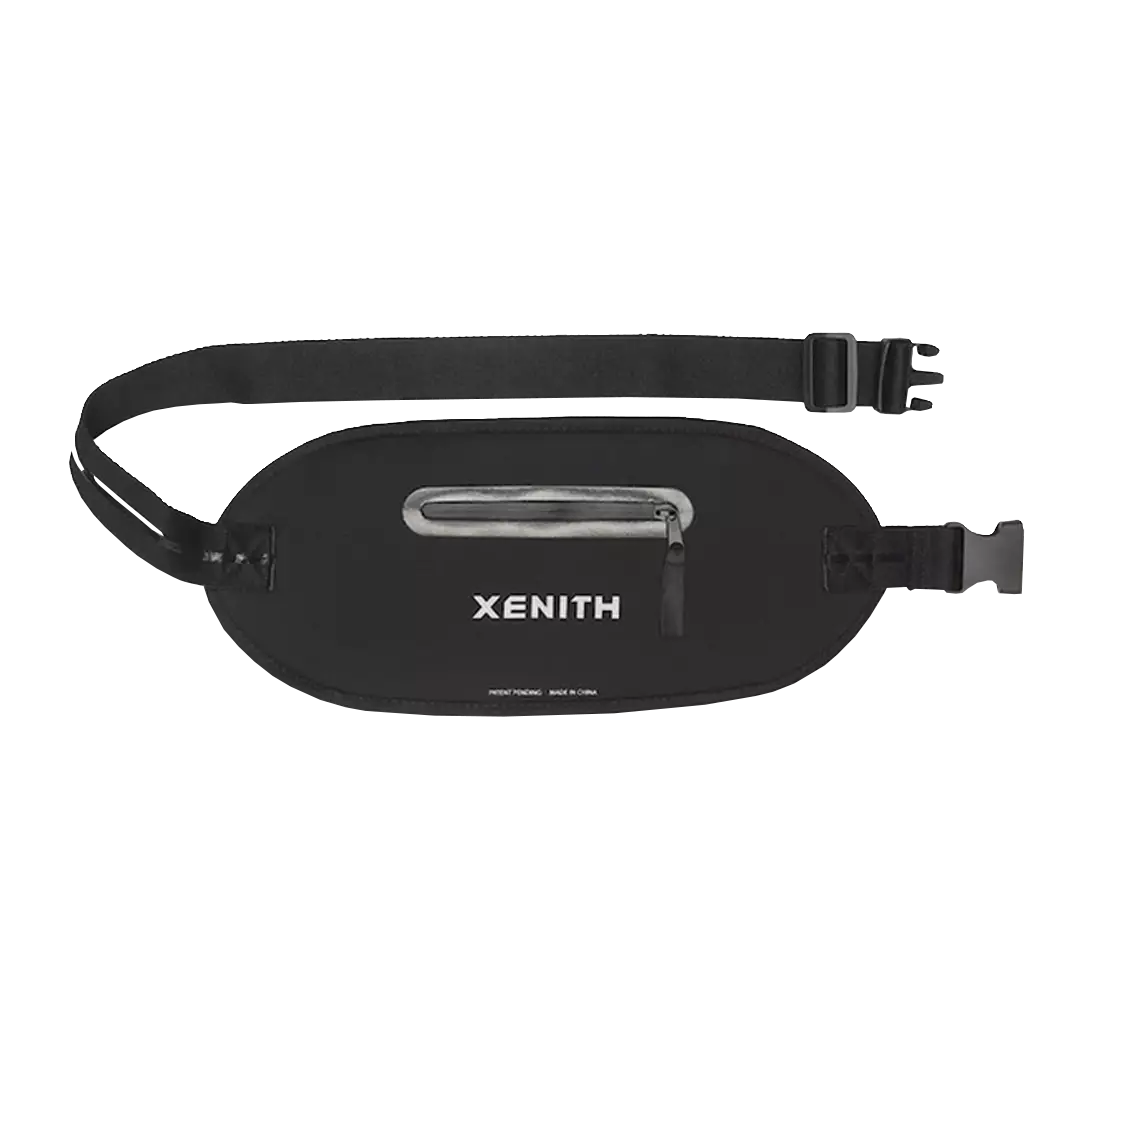 Backside view of black Xenith hand warmer with white logo.